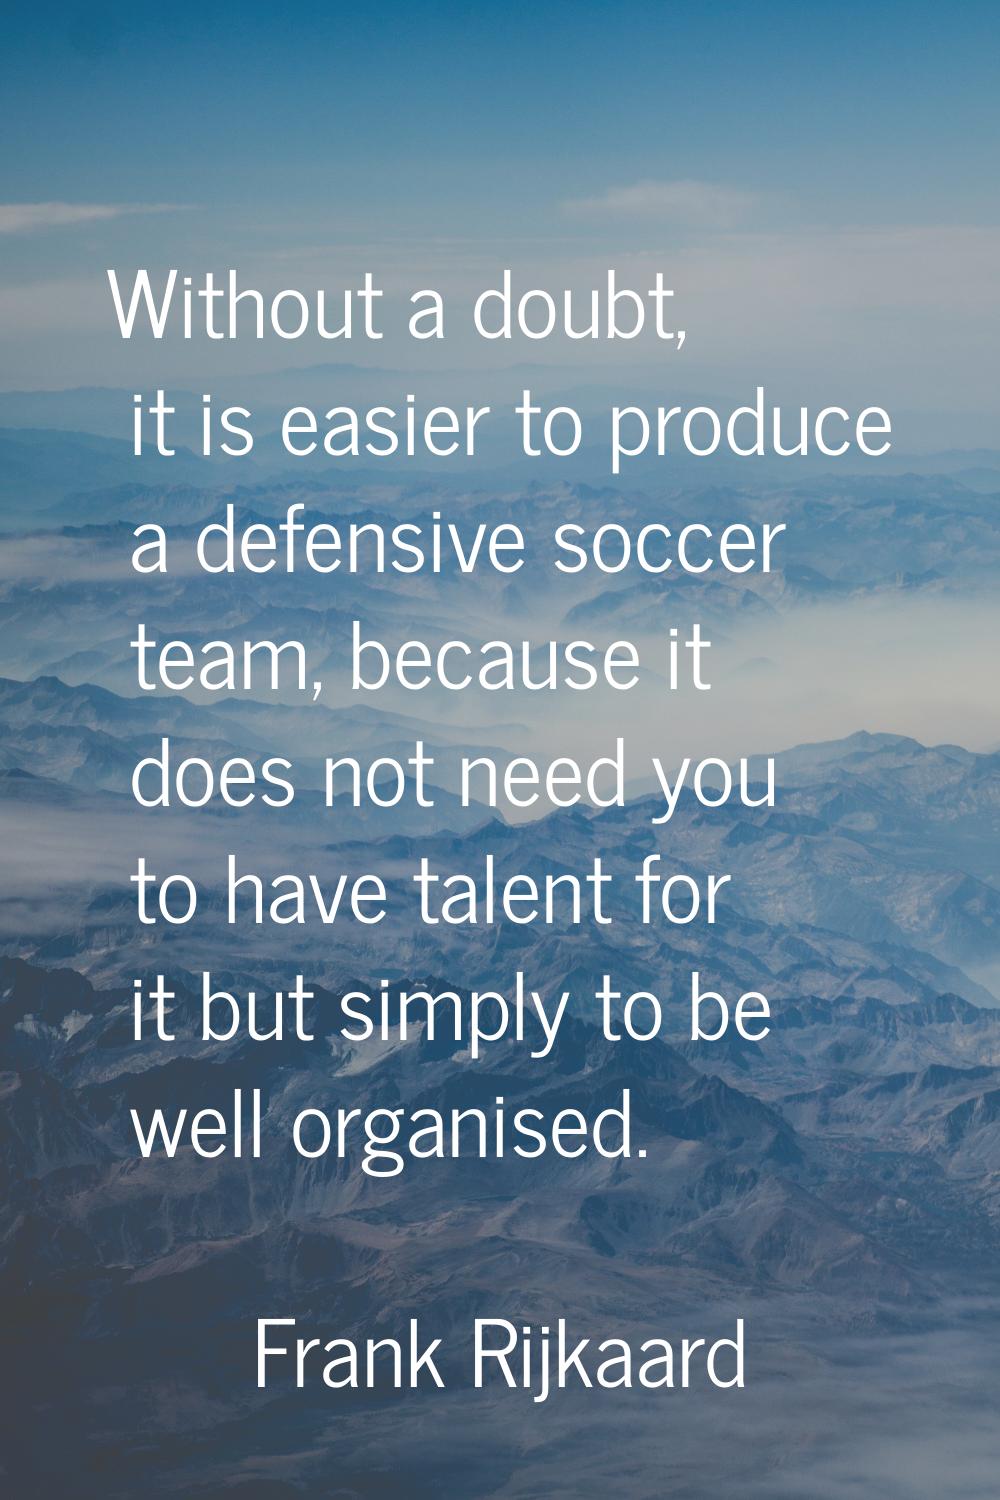 Without a doubt, it is easier to produce a defensive soccer team, because it does not need you to h